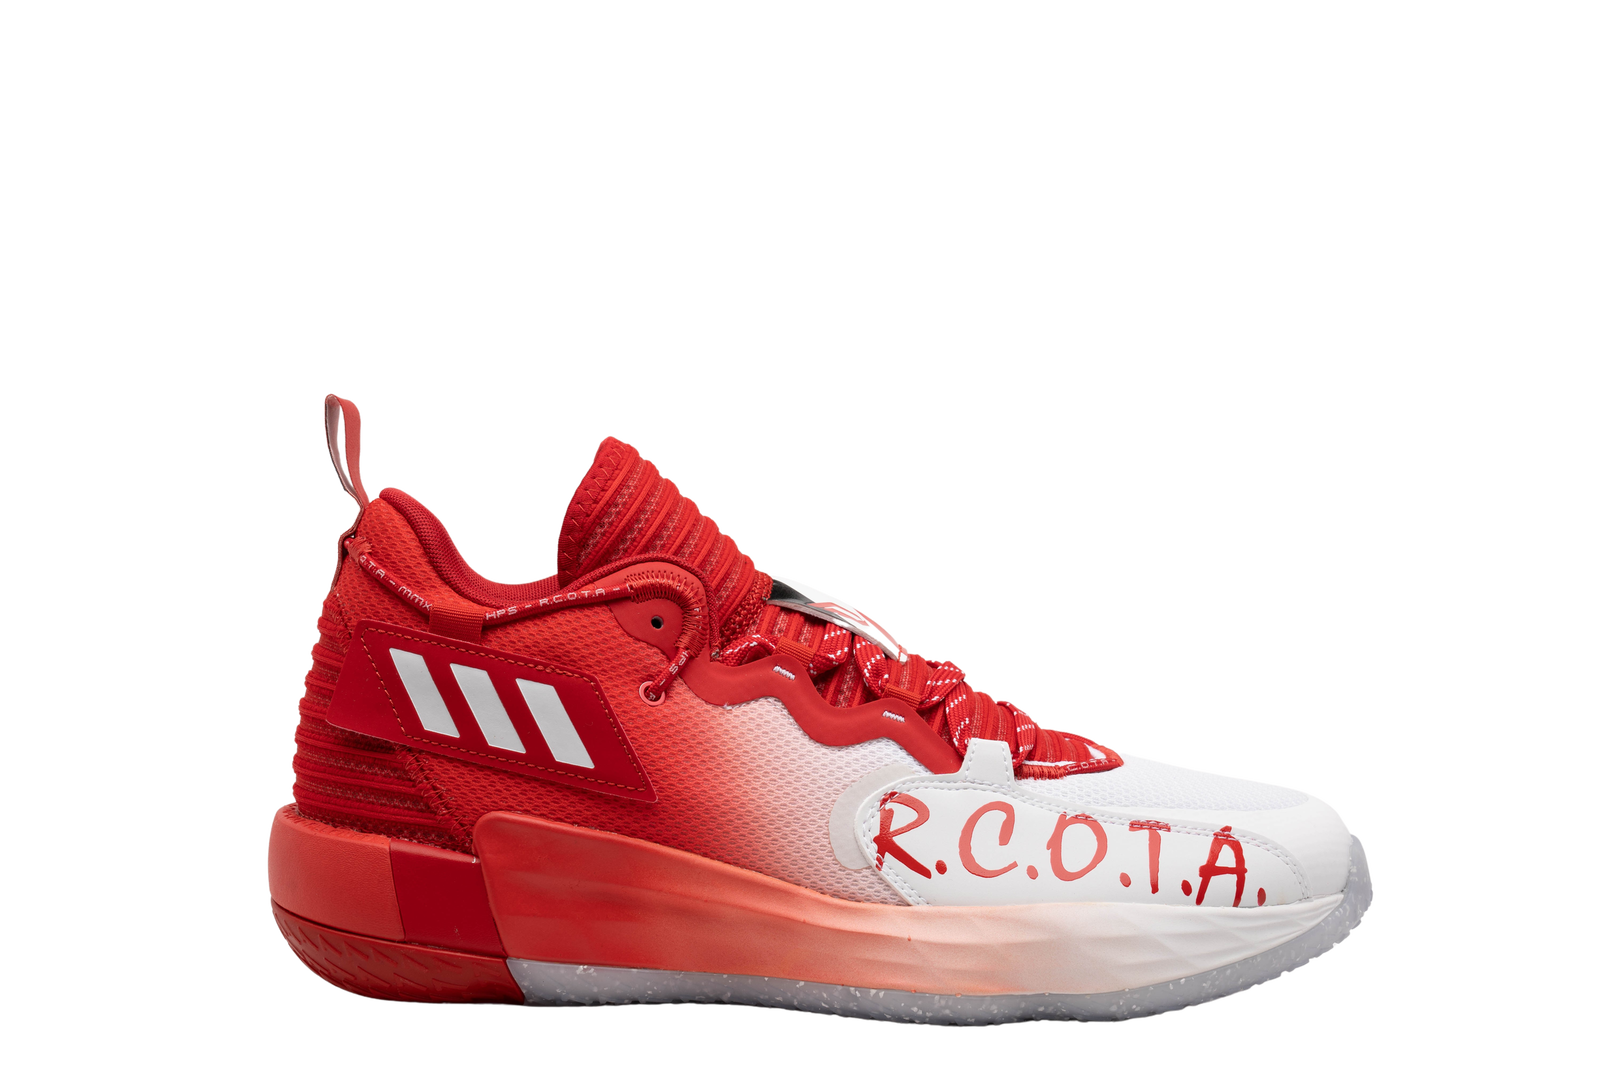 Size 9.5 - adidas Dame 7 EXTPLY R.C.O.T.A. 2021 for sale online | eBay